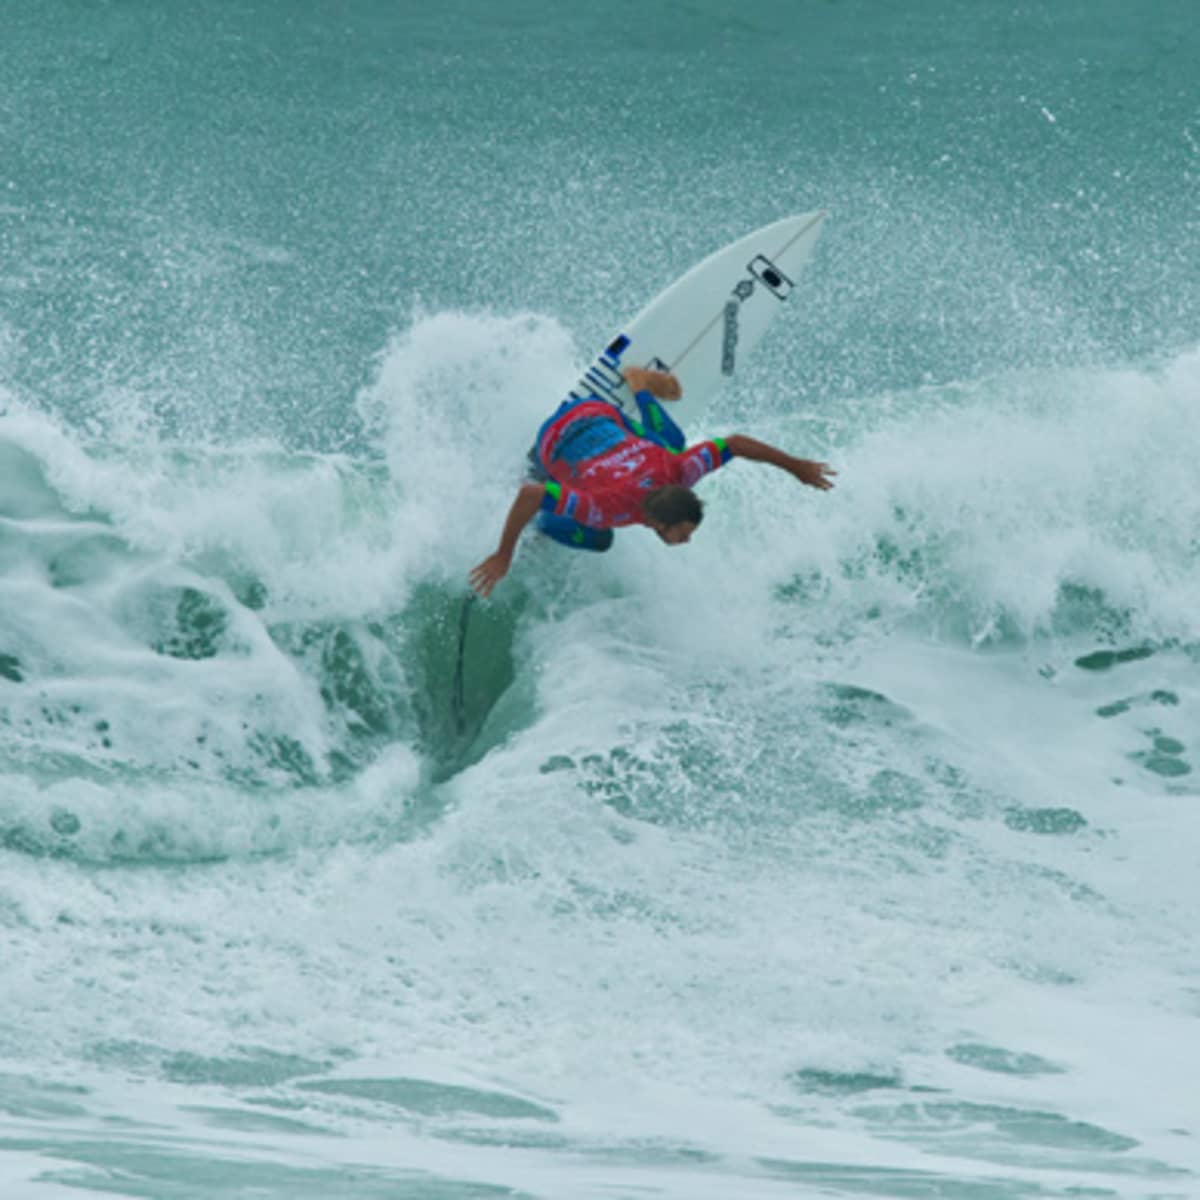 Surfers get creative in smaller conditions on Day 2 of O'Neill